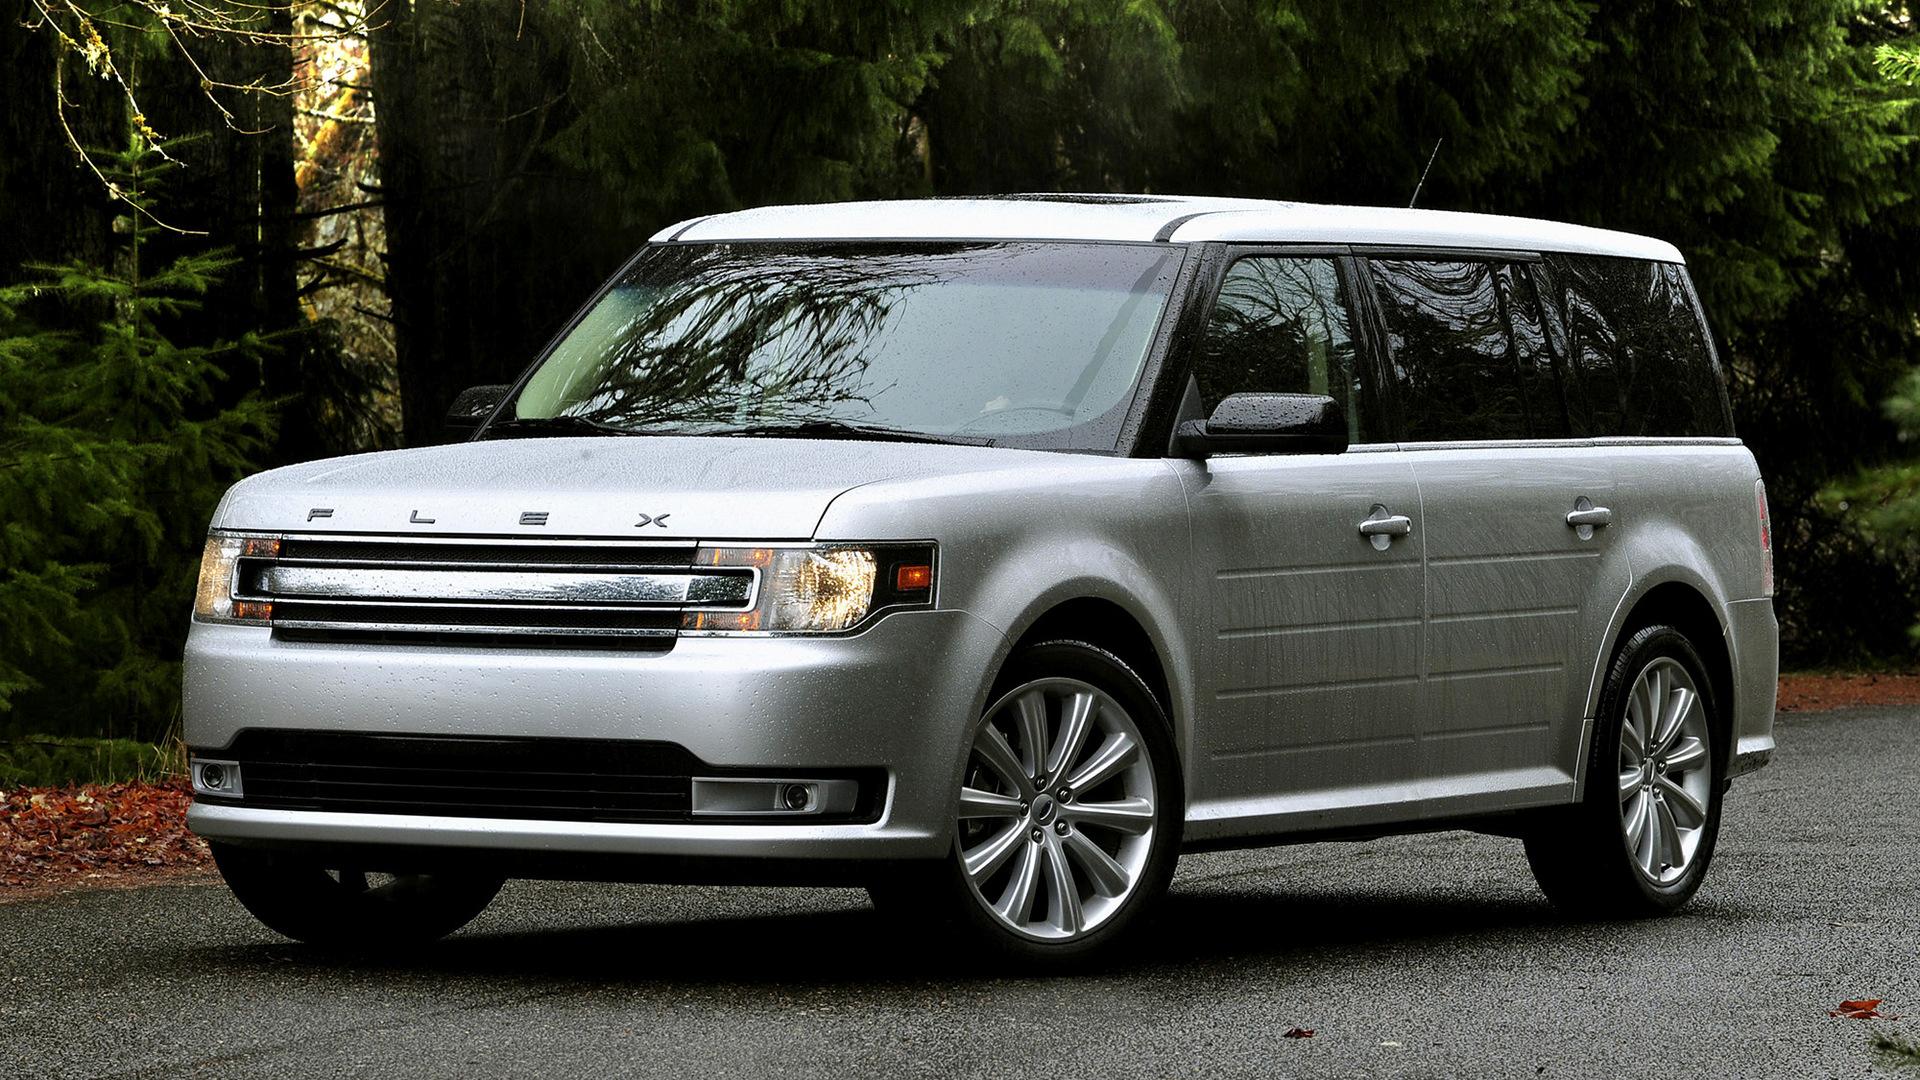 Ford Flex and HD Image